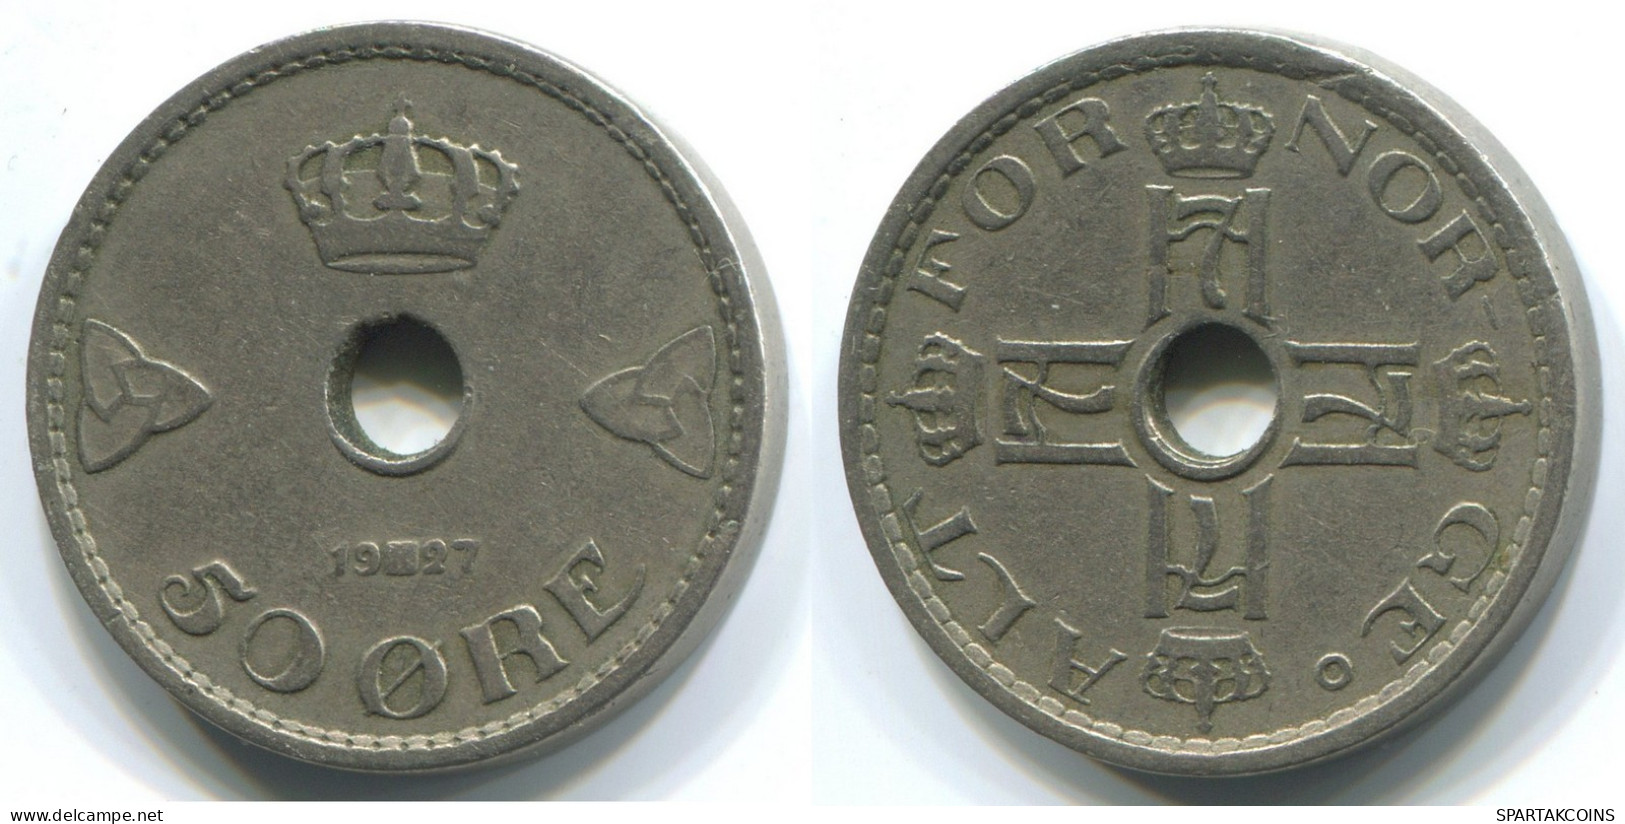 50 ORE 1927 NORWAY Coin #WW1039.U.A - Norway